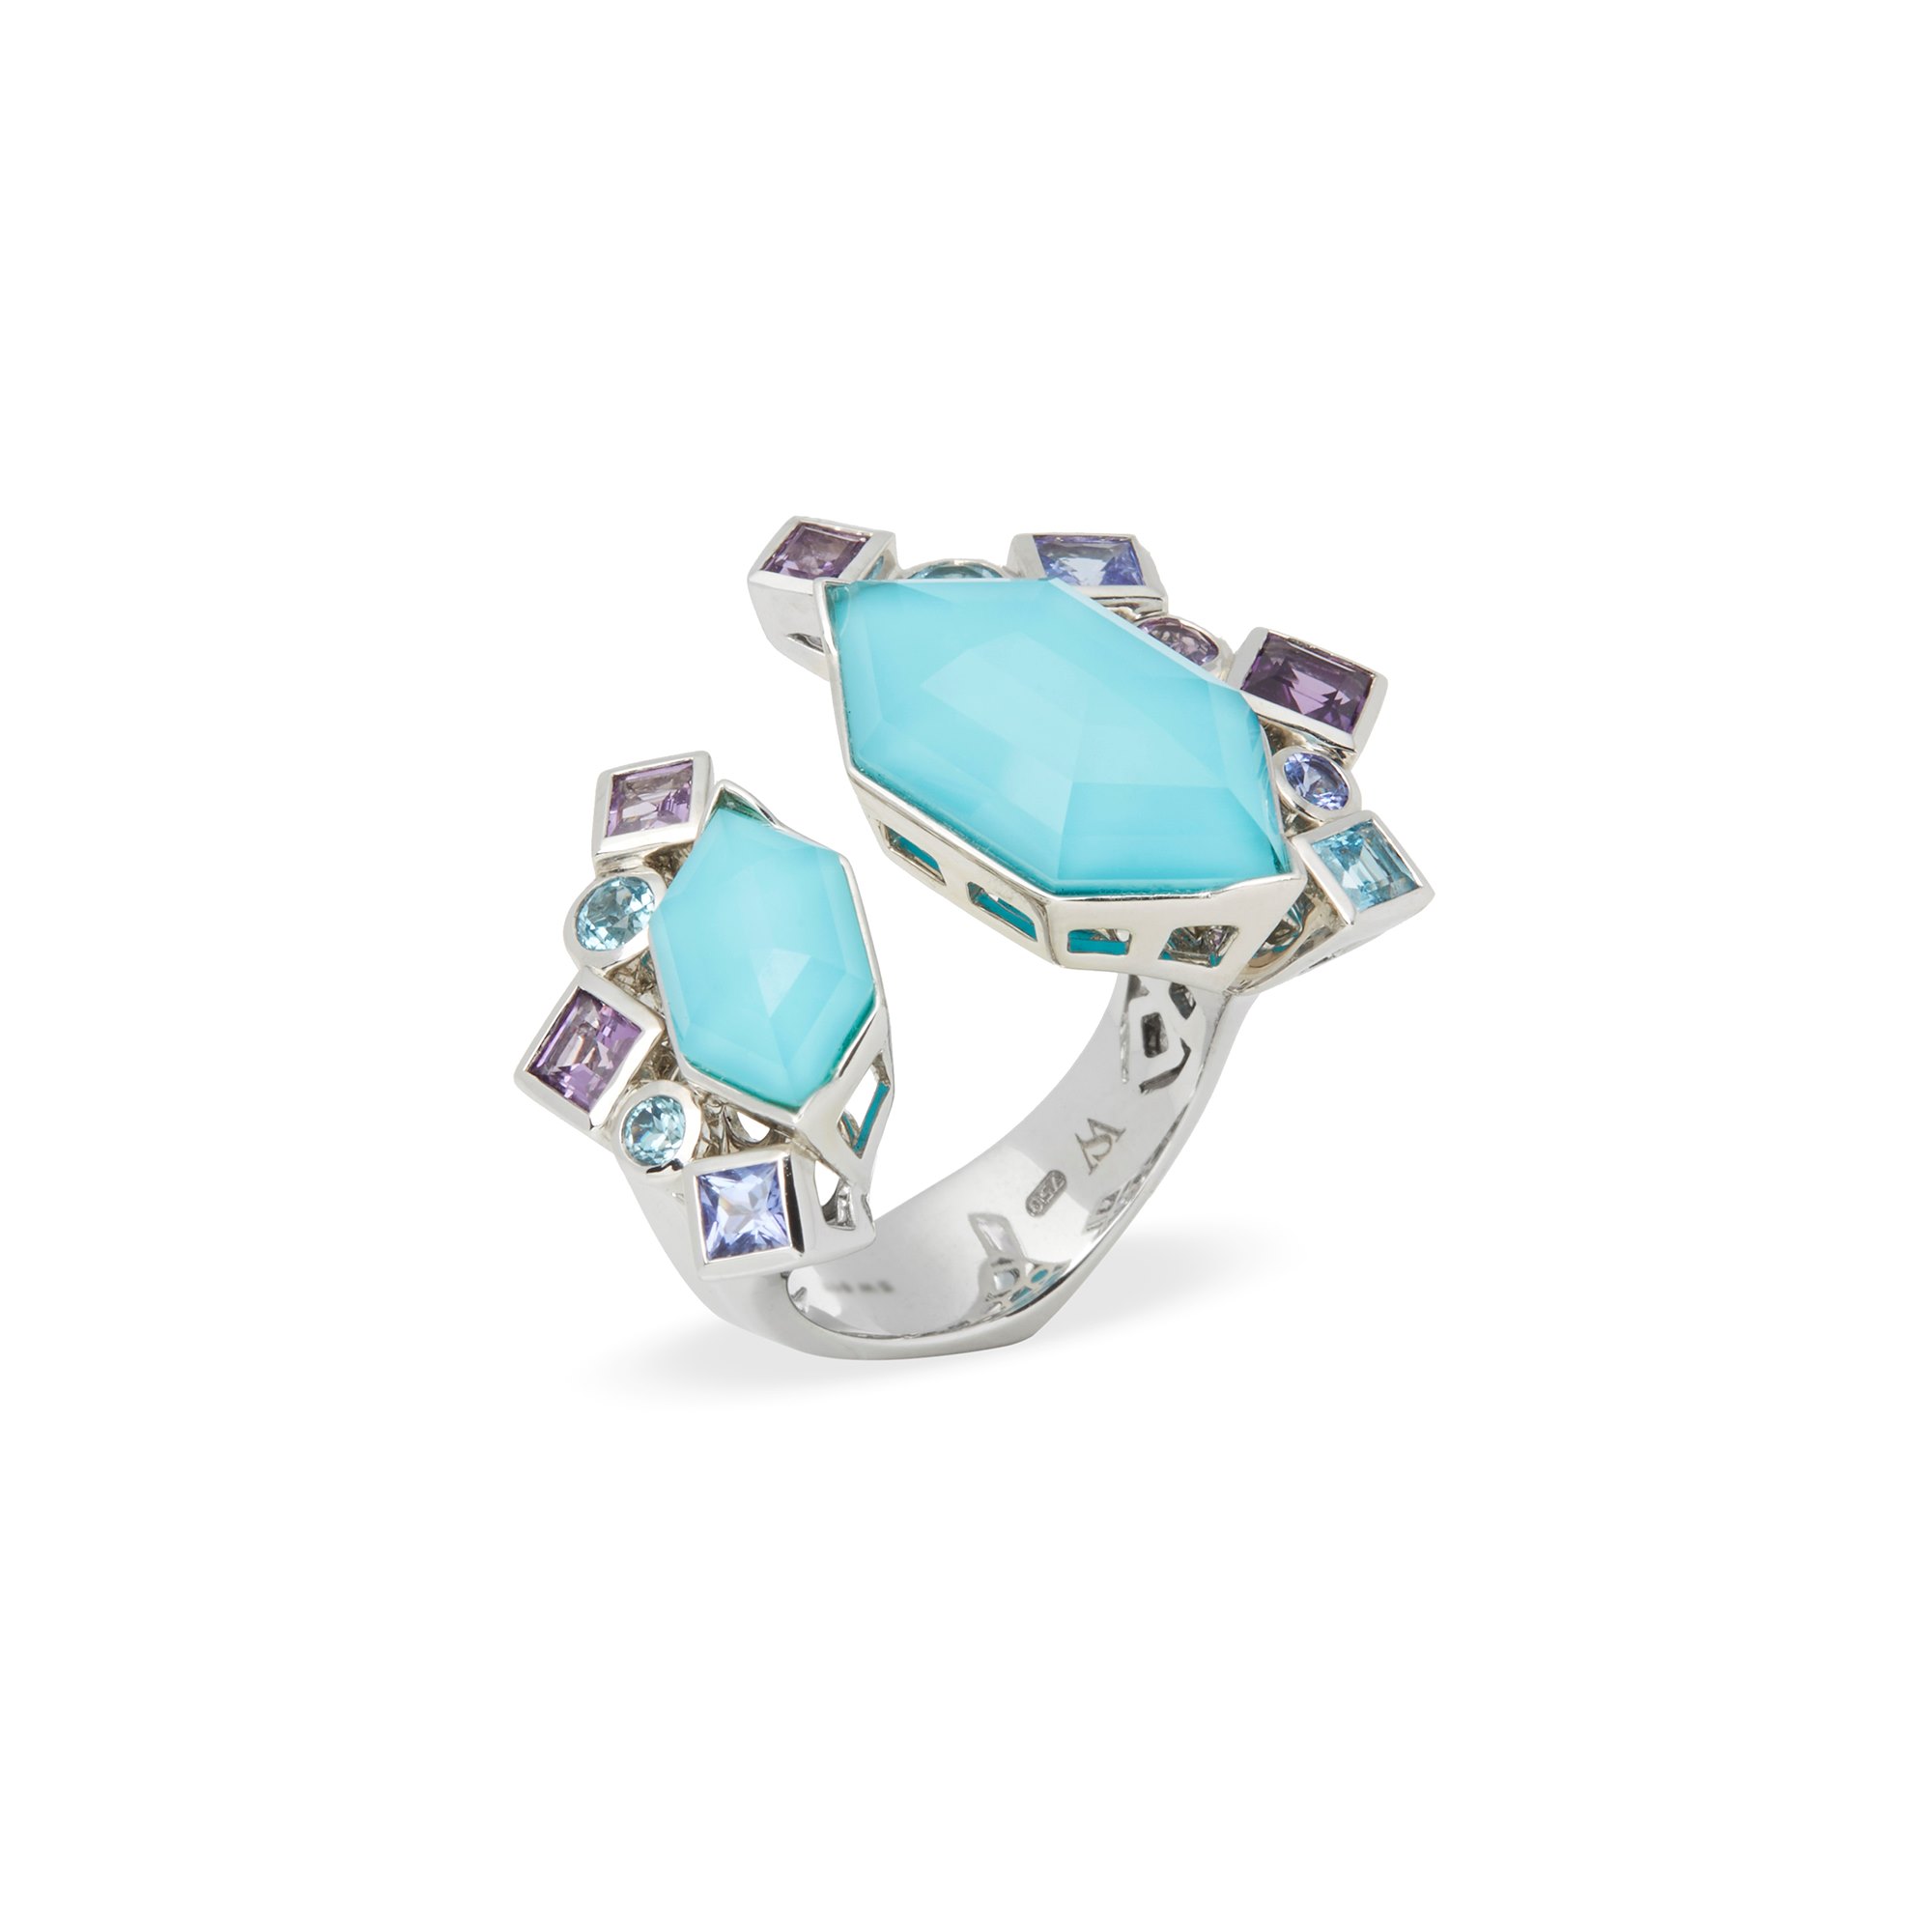 Stephen Webster 18ct White Gold Struck Crystal Haze Turquoise Open Ring